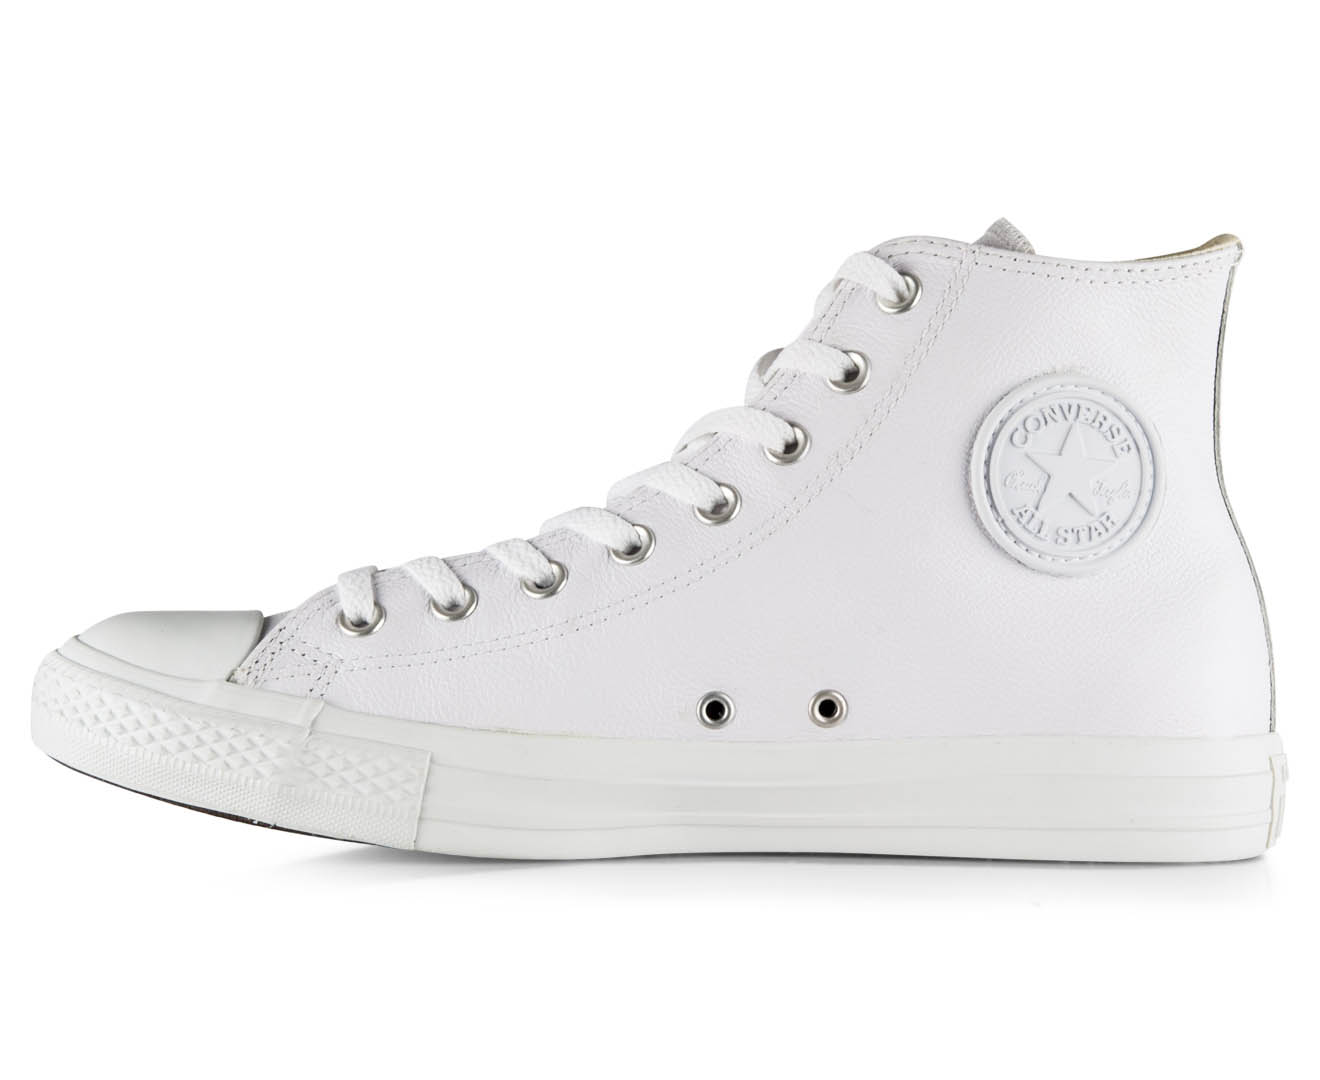 Converse Chuck Taylor All Star Leather High Top Sneakers - White ...